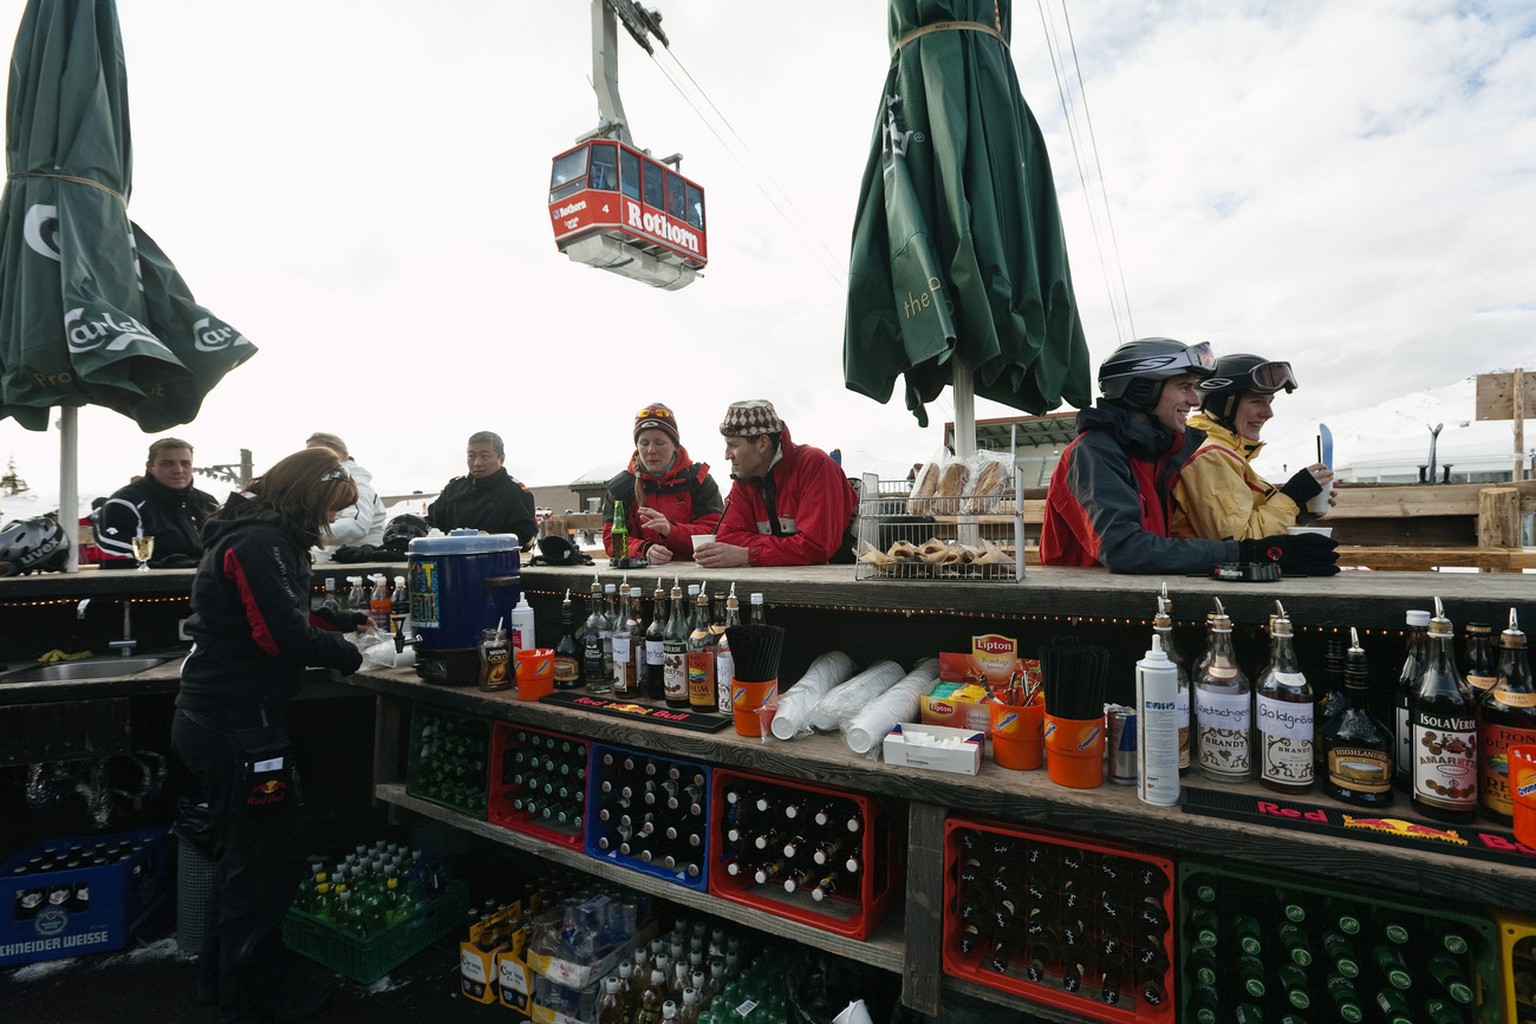 Winter athletes have drinks at a snow bar in the skiing area Lenzerheide in the canton of Grisons, Switzerland, pictured on January 30, 2009. (KEYSTONE/Alessandro Della Bella)

Wintersportler verpfleg ...